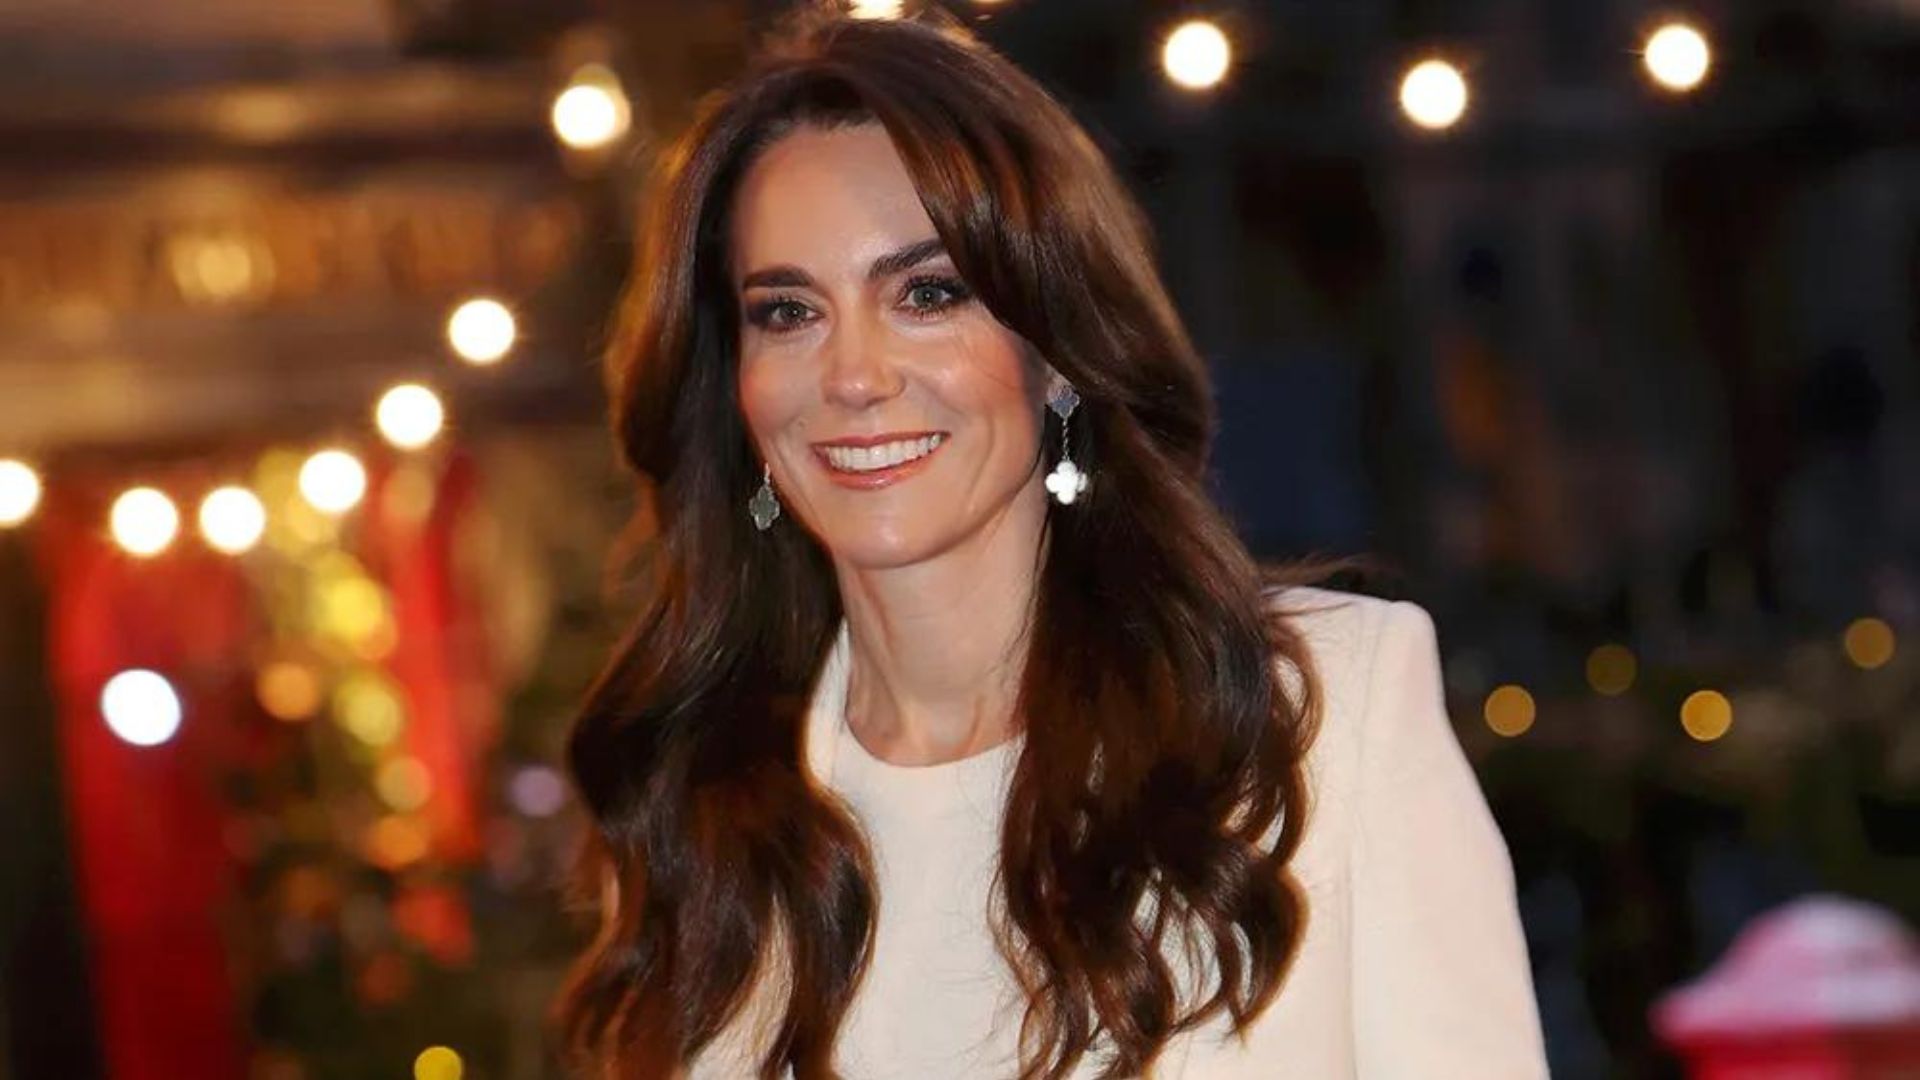 Speculation Surrounds Kate Middleton’s Recovery Following ‘Planned abdominal surgery’